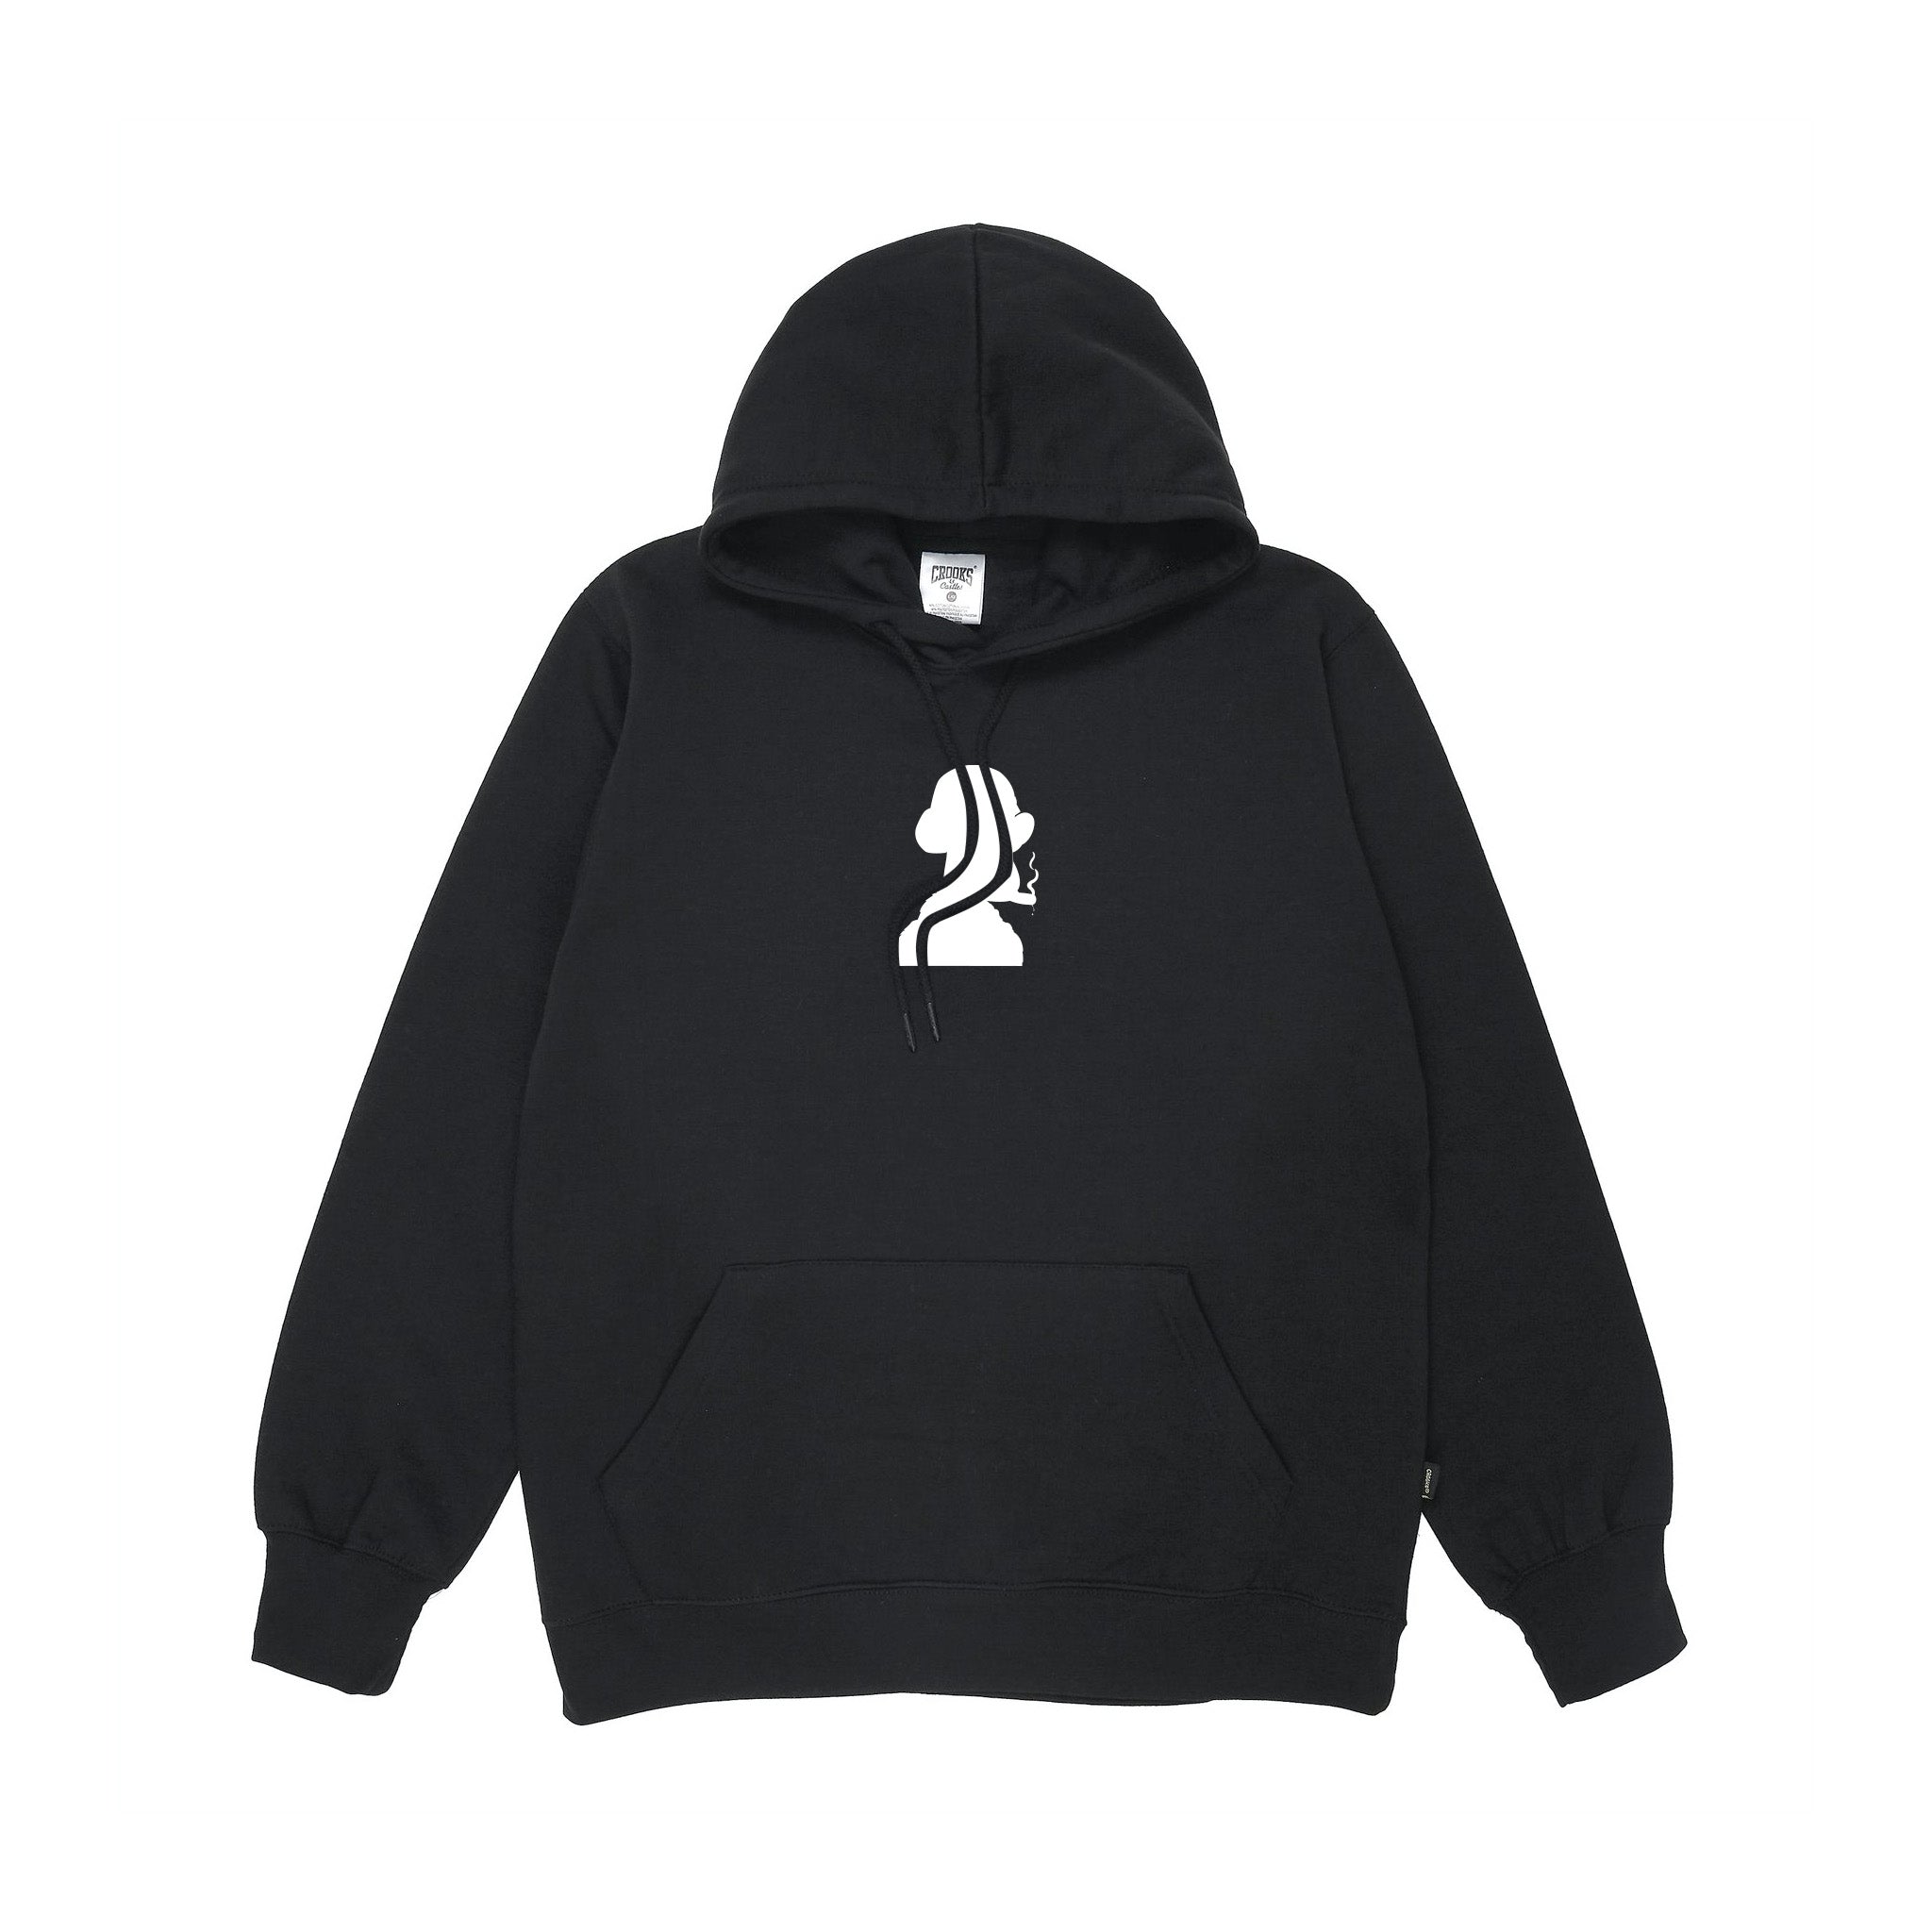 Dr. Bombay Silhouette Hoodie